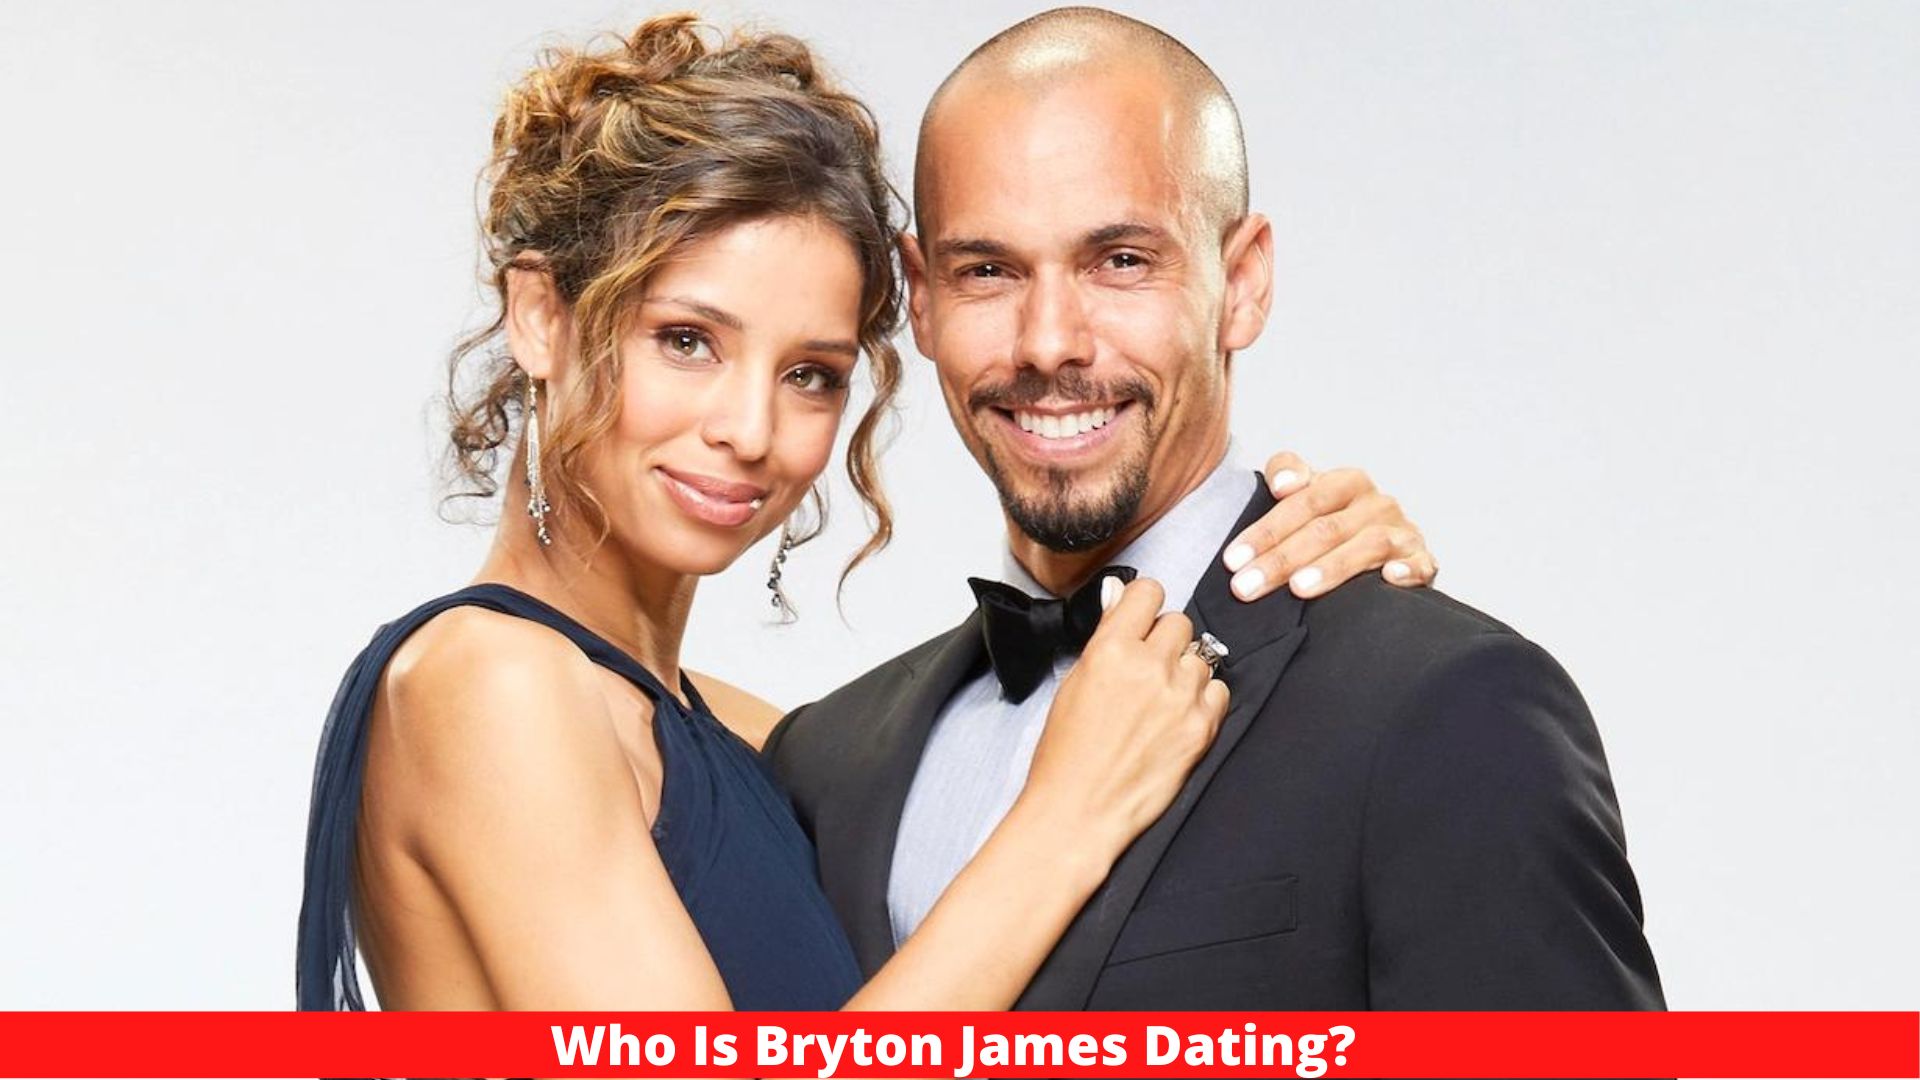 Who Is Bryton James Dating?